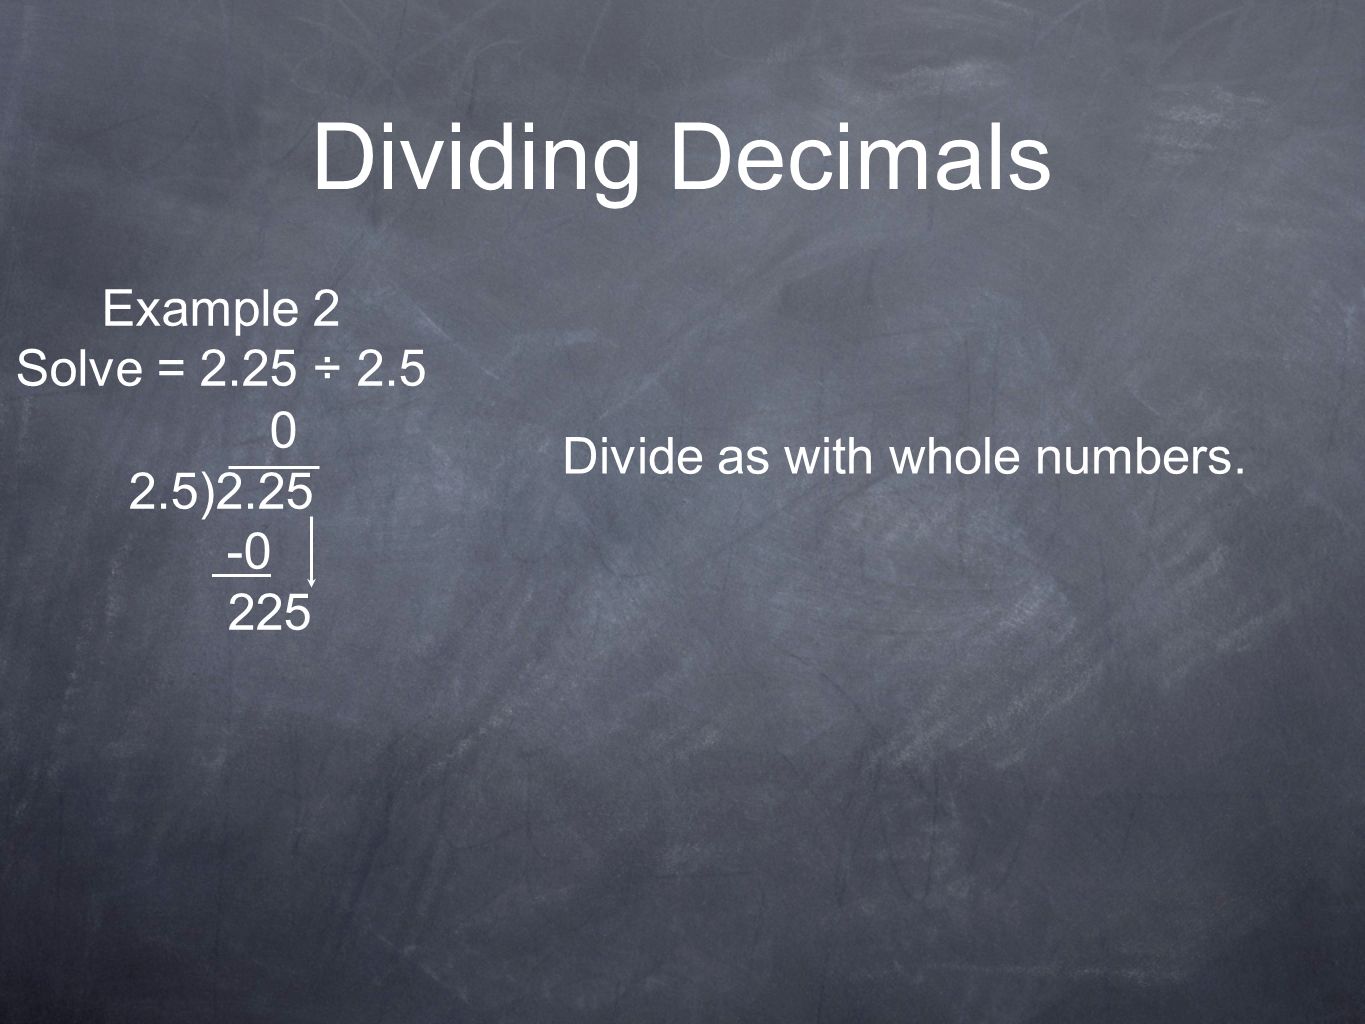 Divide as with whole numbers.